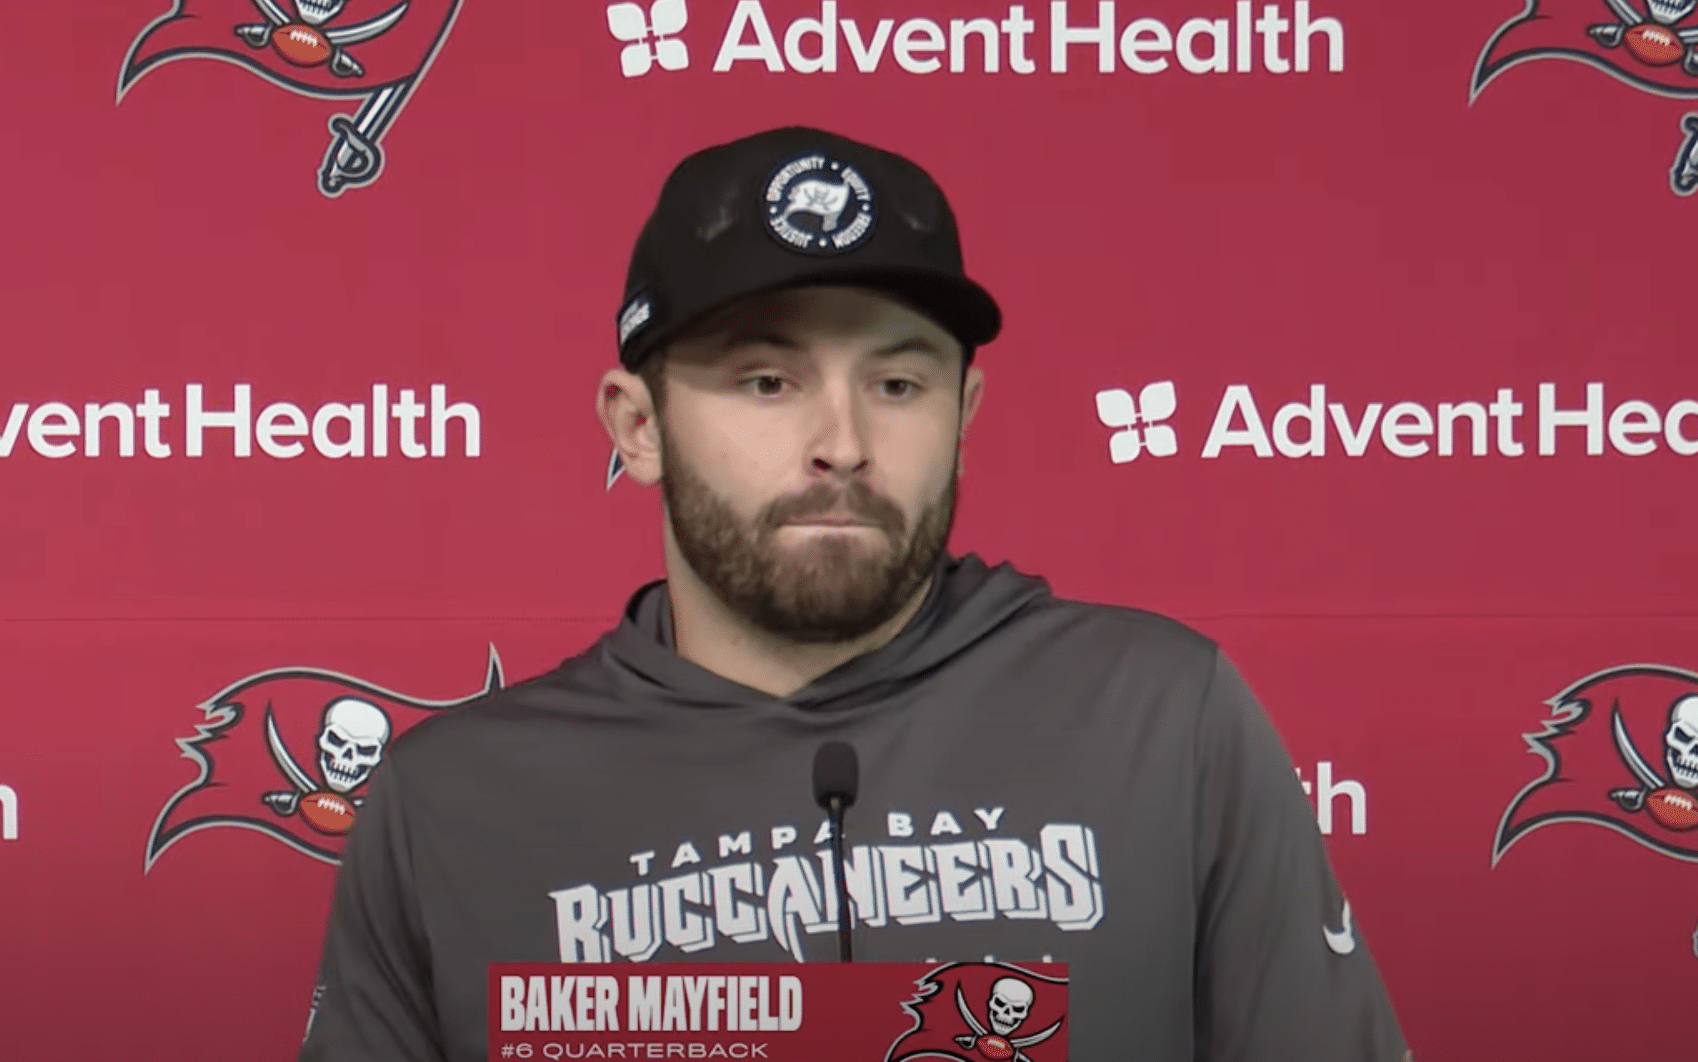 Baker Mayfield throws shade at Detroit Lions